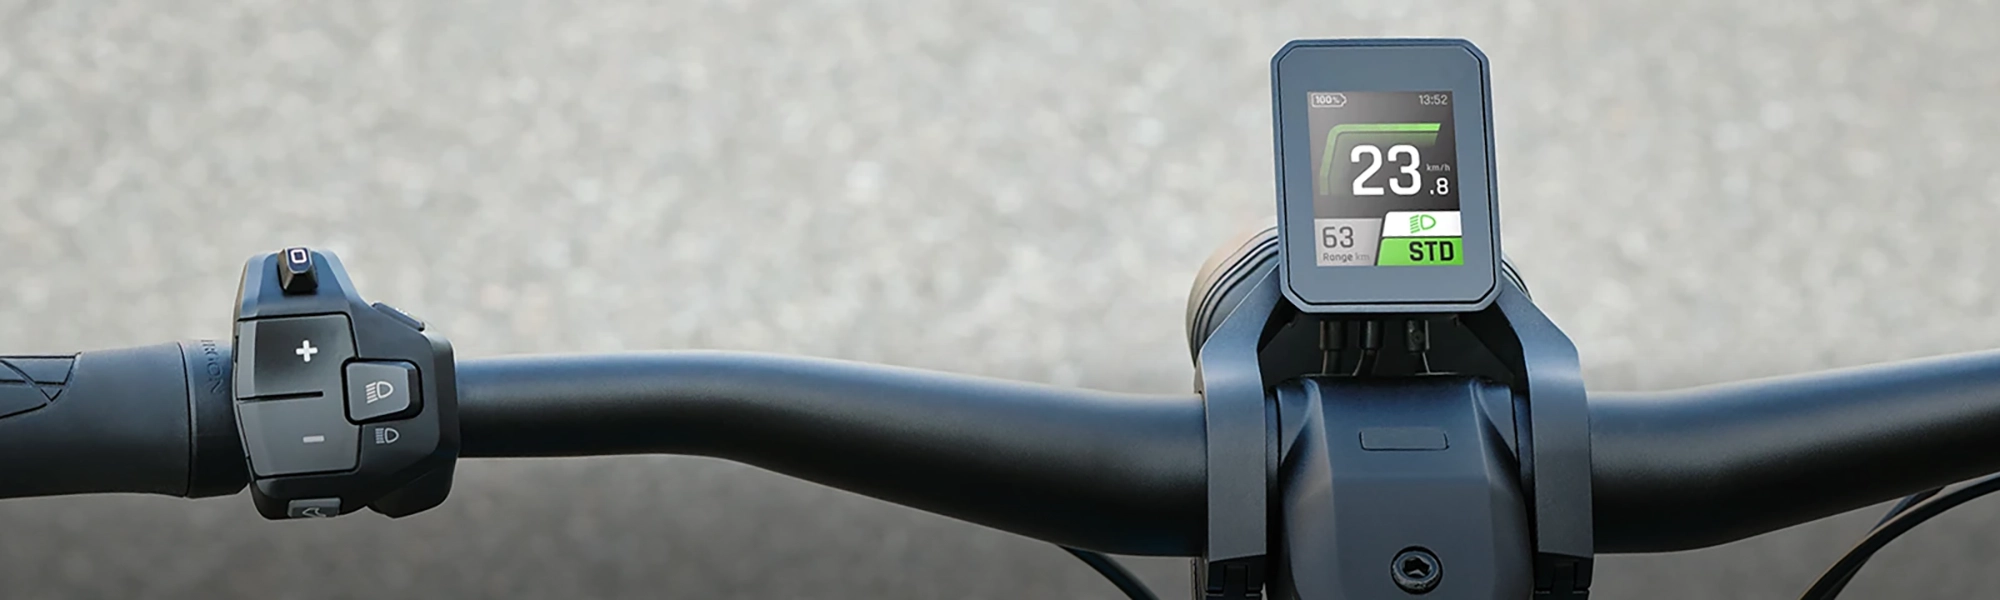 LED Display e-bike – what digital command can do when you're out and